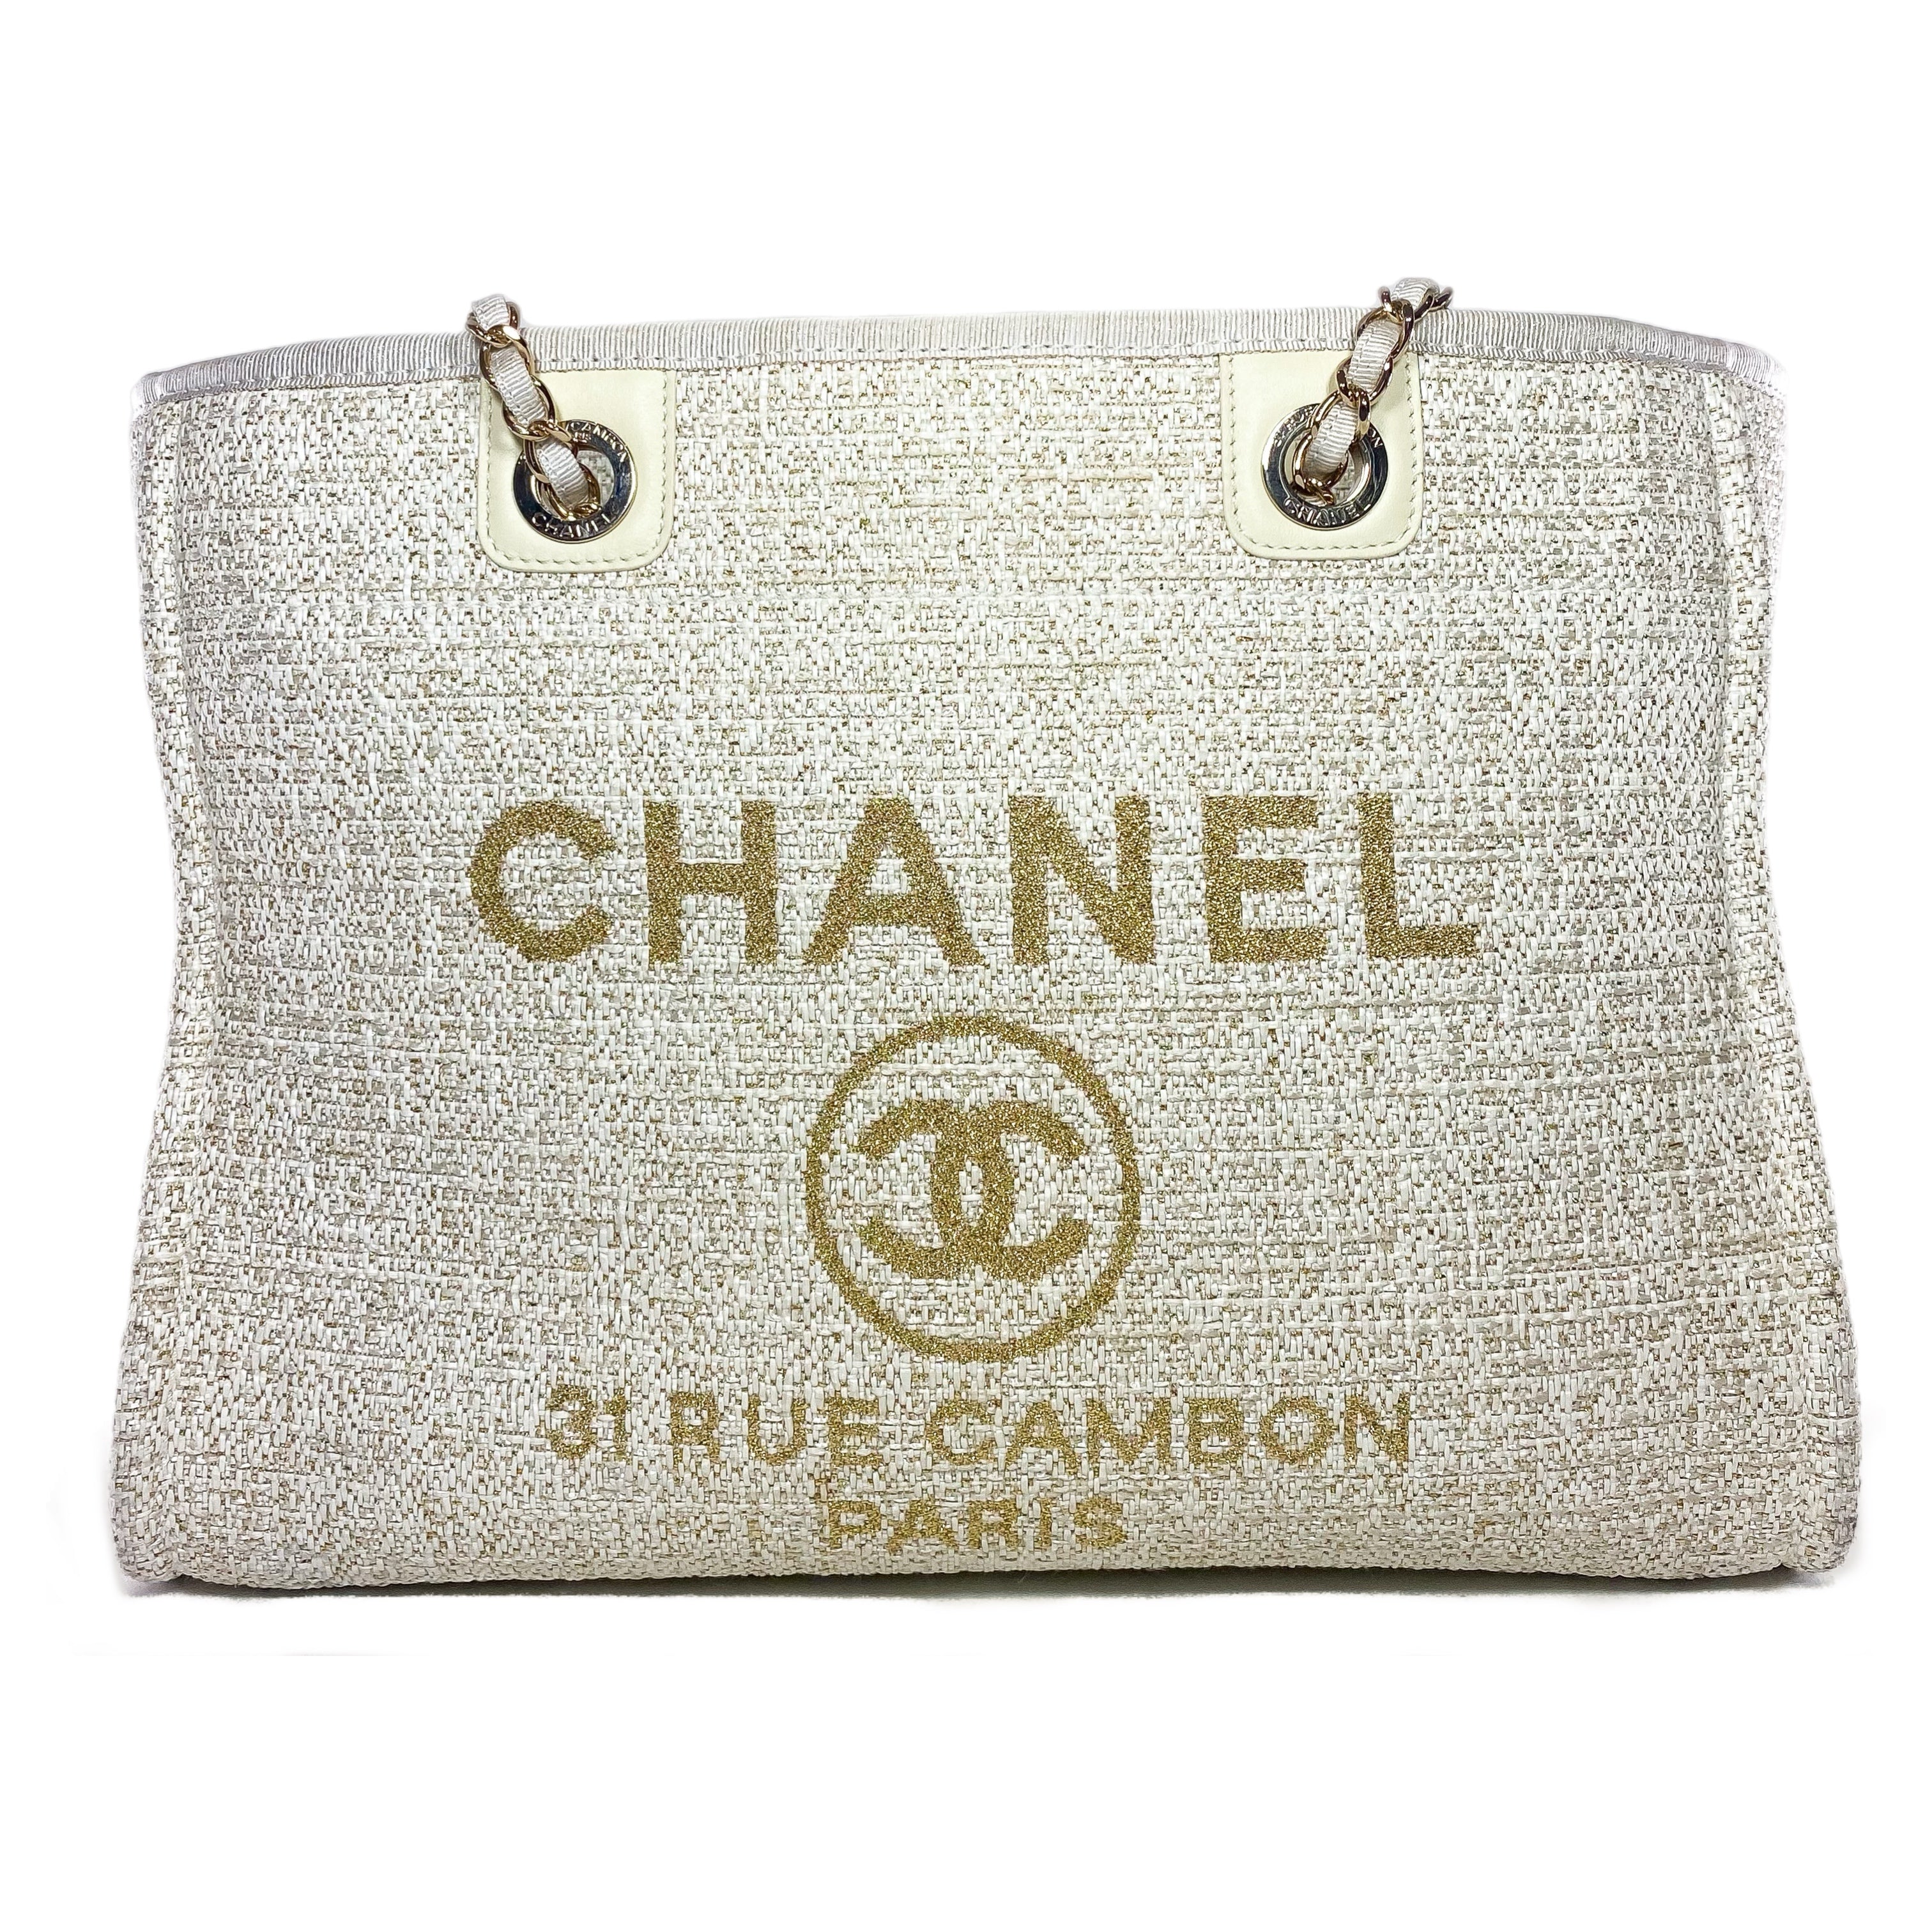 Chanel Large Ivory Deauville